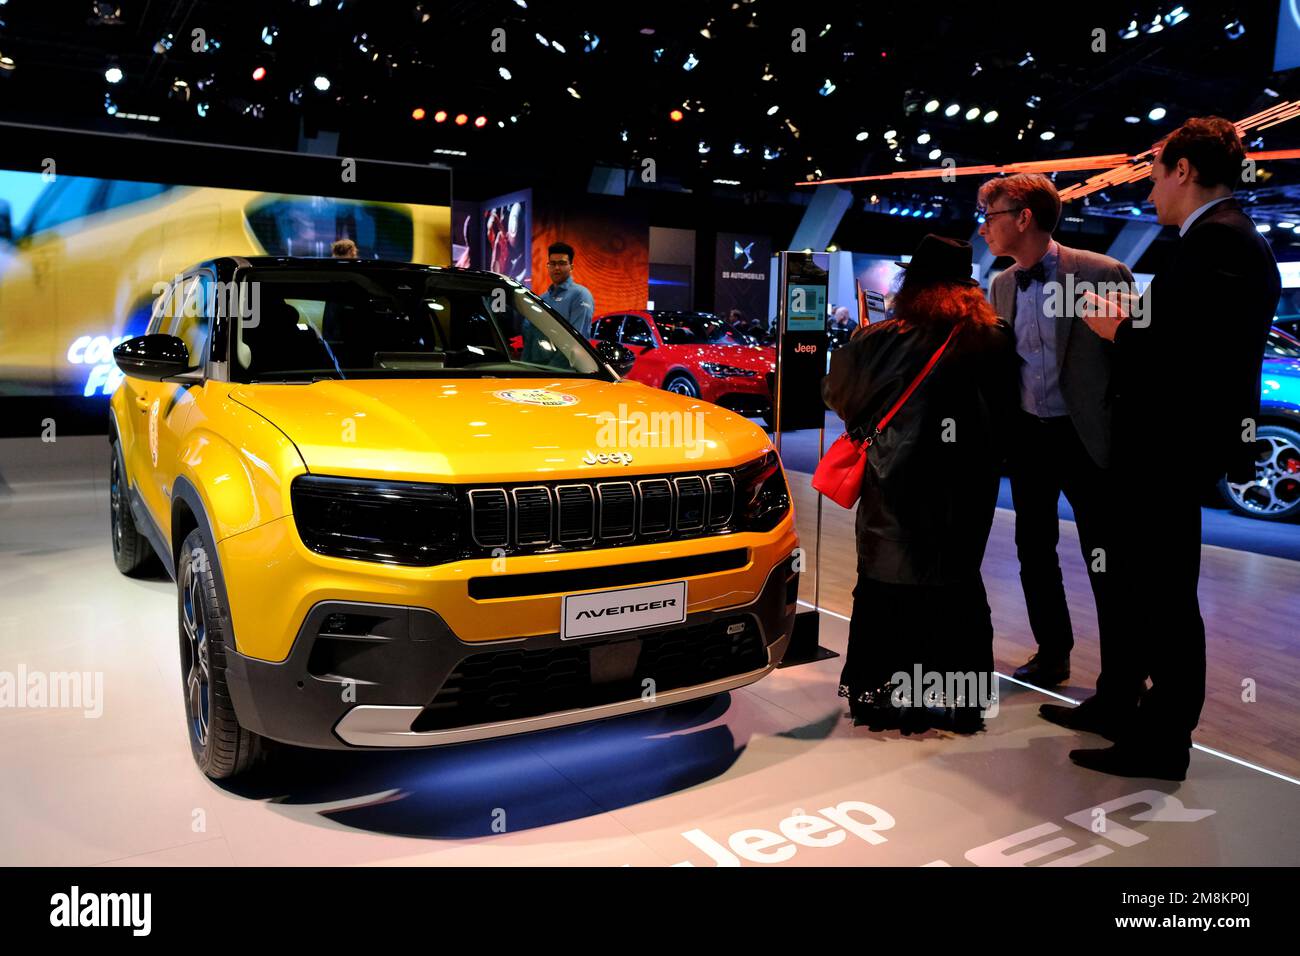 Brussels, Belgium. 13th Jan, 2023. Jeep car on display during the opening  of the Brussels Motor Show at the Expo in Brussels, Belgium on Jan. 13,  2023. Credit: ALEXANDROS MICHAILIDIS/Alamy Live News